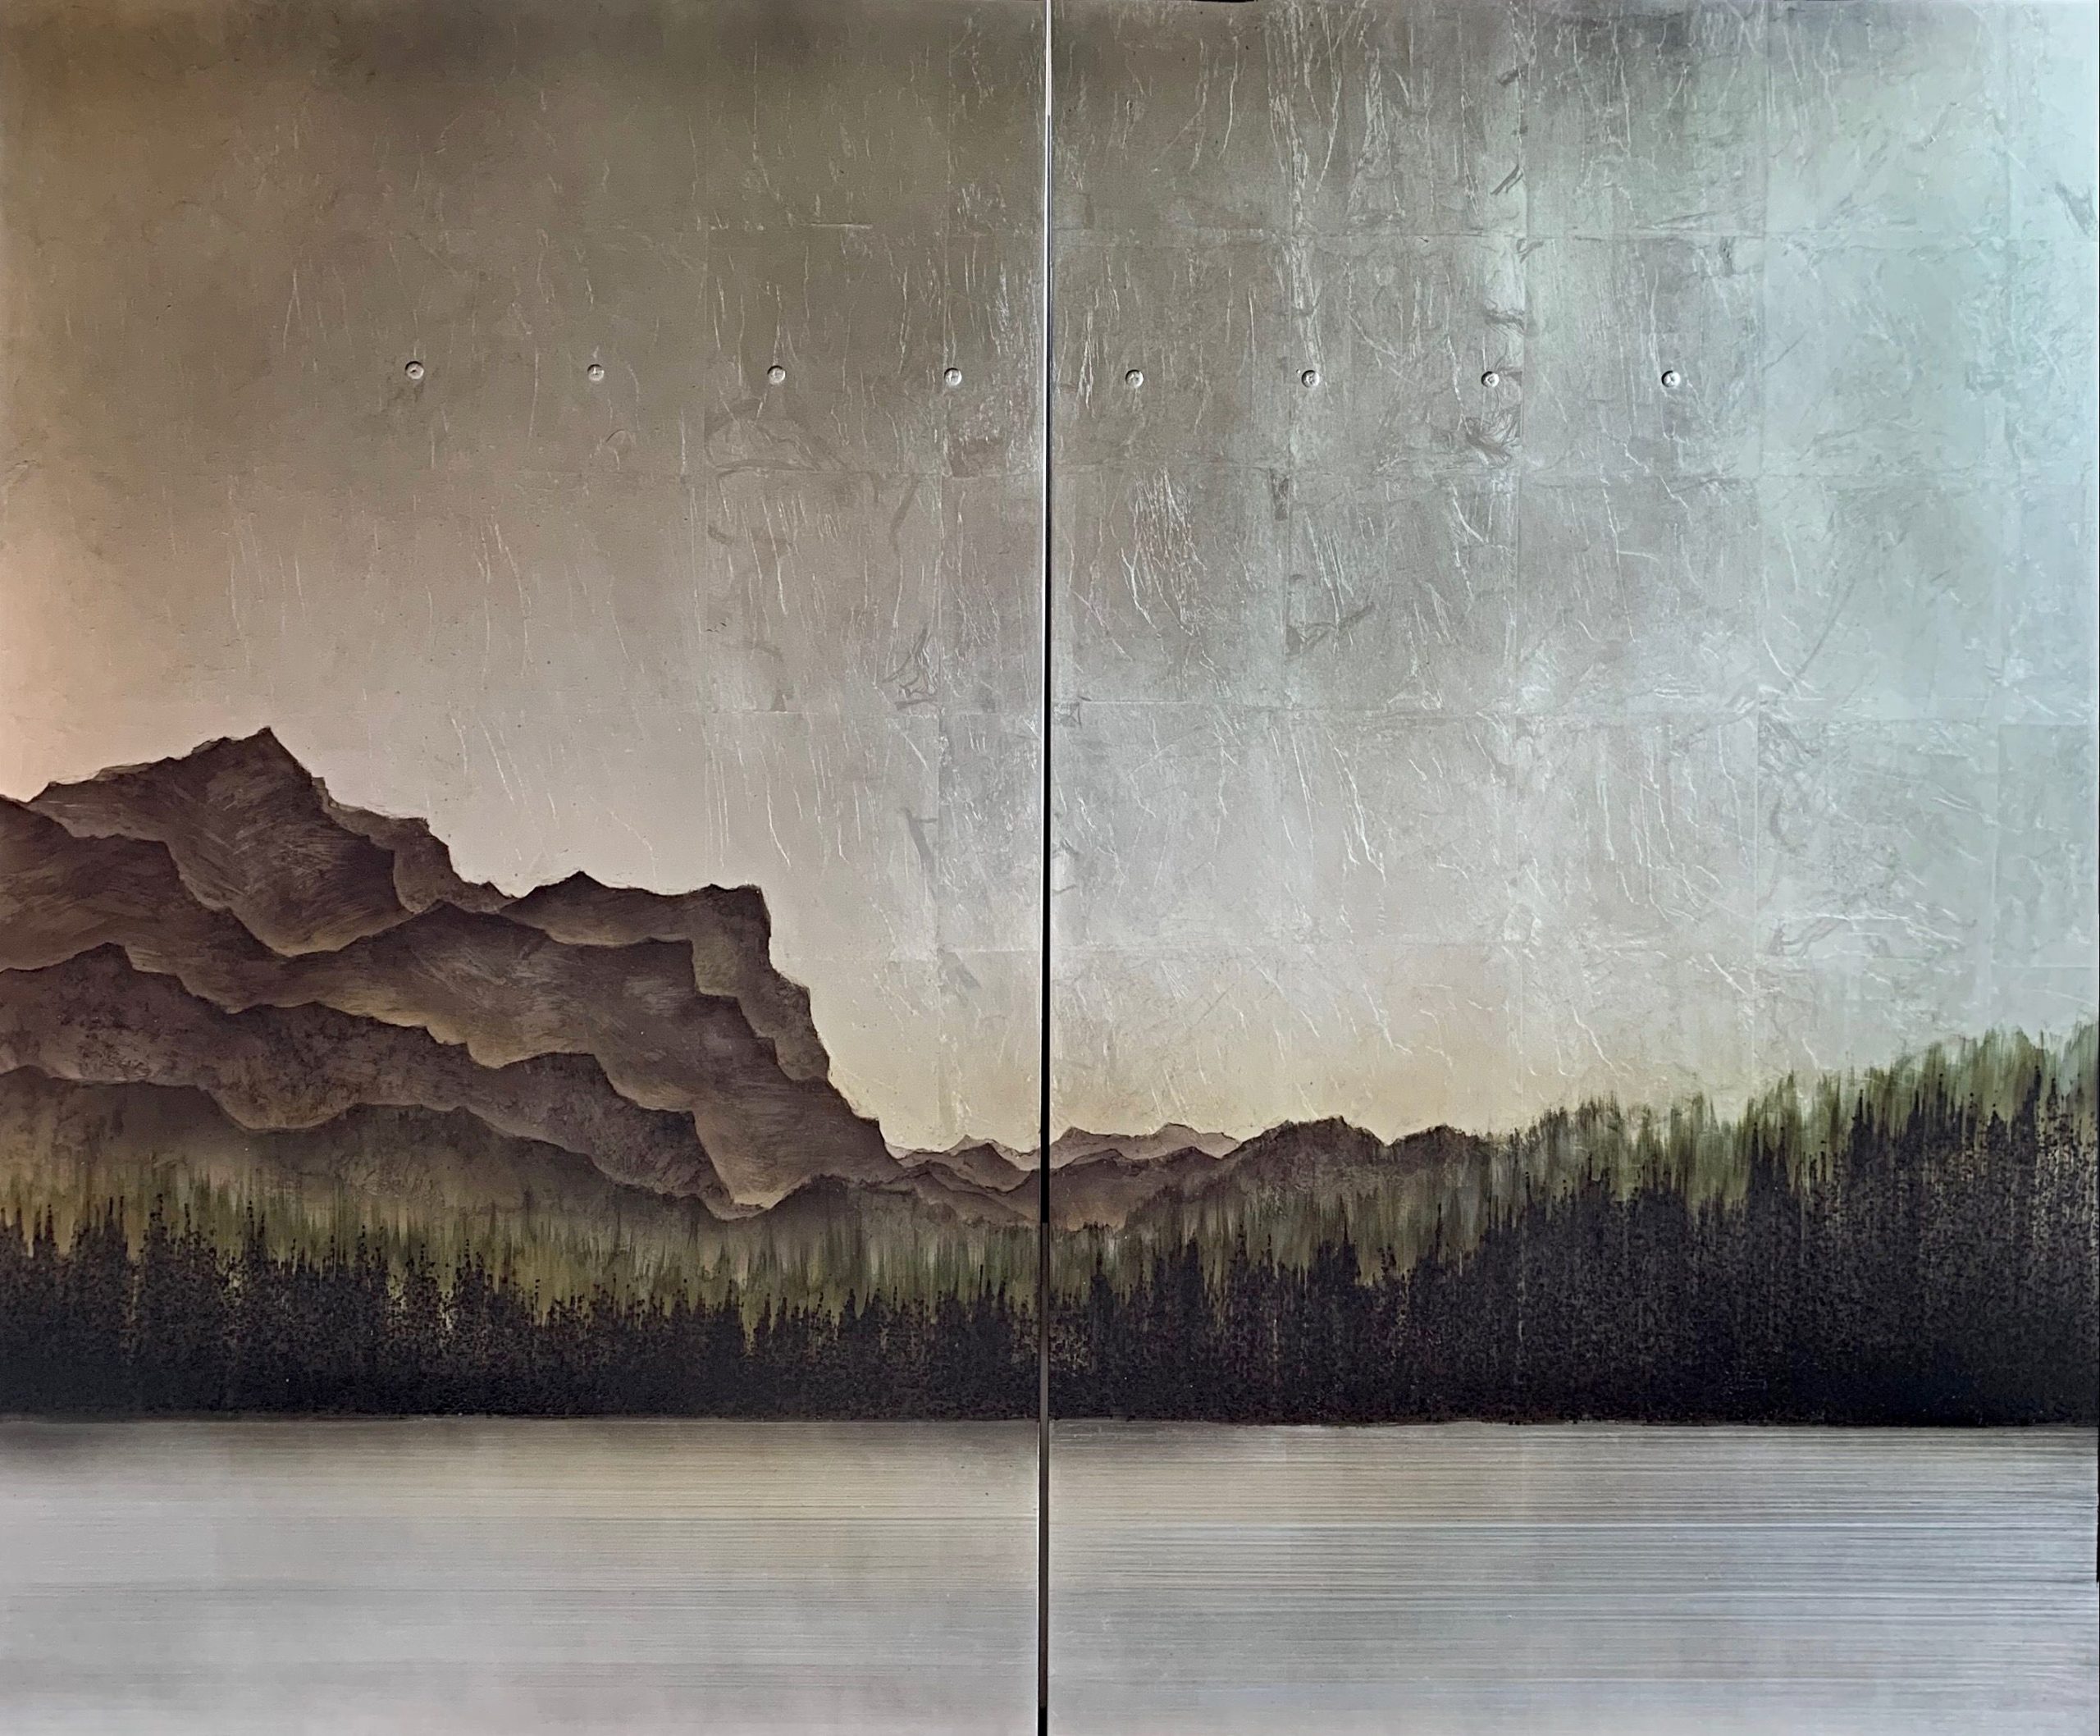 Secret Valley, mixed media landscape painting by David Graff | Effusion Art Gallery + Cast Glass Studio, Invermere BC